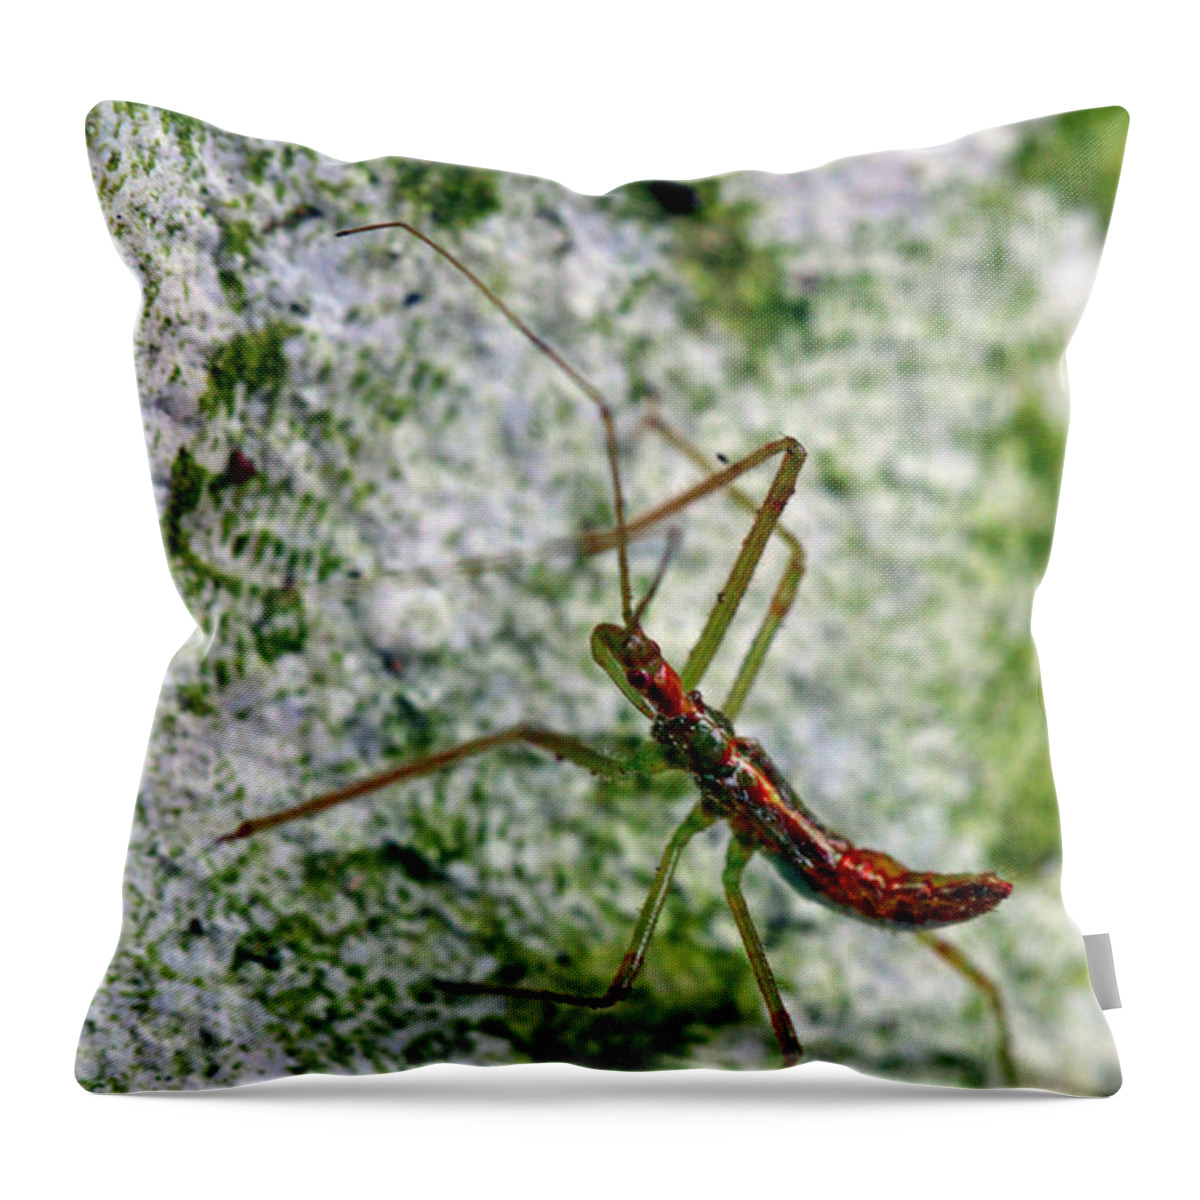 Insects Throw Pillow featuring the photograph Christmas Bug by Jennifer Robin